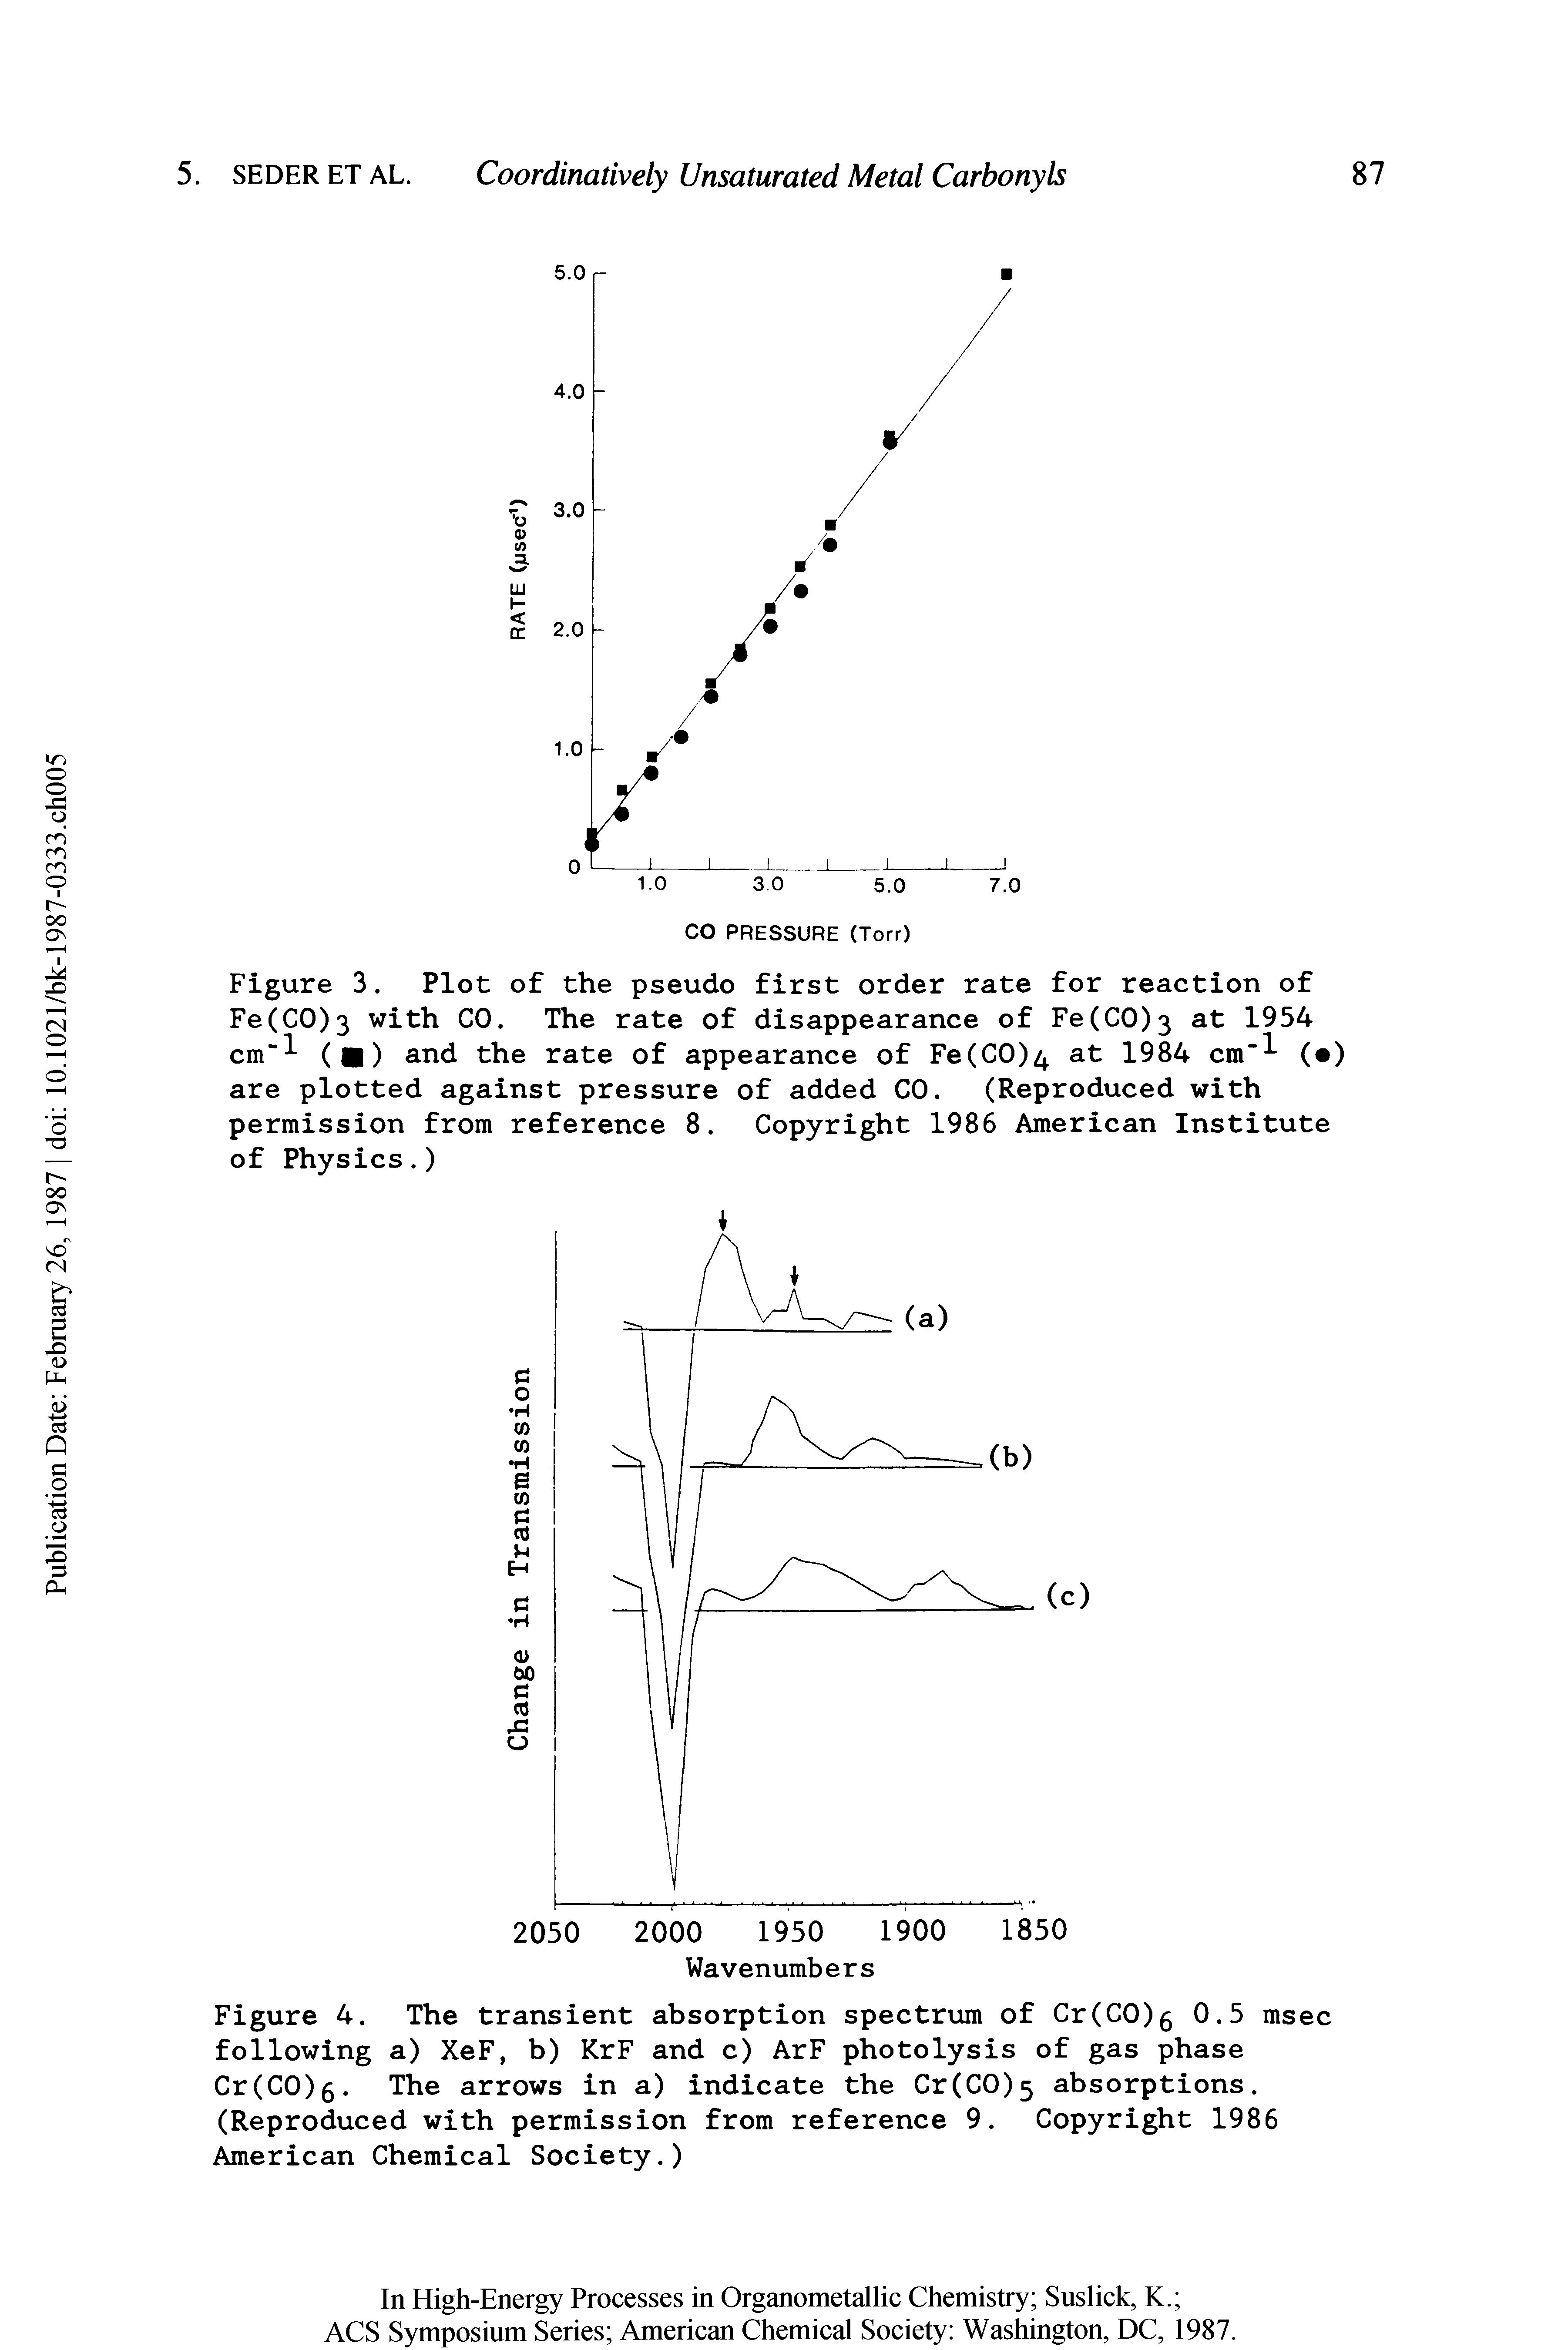 Figure 3. Plot of the pseudo first order rate for reaction of Fe(C0)3 with CO. The rate of disappearance of Fe(C0)3 at 1954 cm l ( ) and the rate of appearance of Fe(C0)4 at 1984 cm ( ) are plotted against pressure of added CO. (Reproduced with permission from reference 8. Copyright 1986 American Institute of Physics.)...